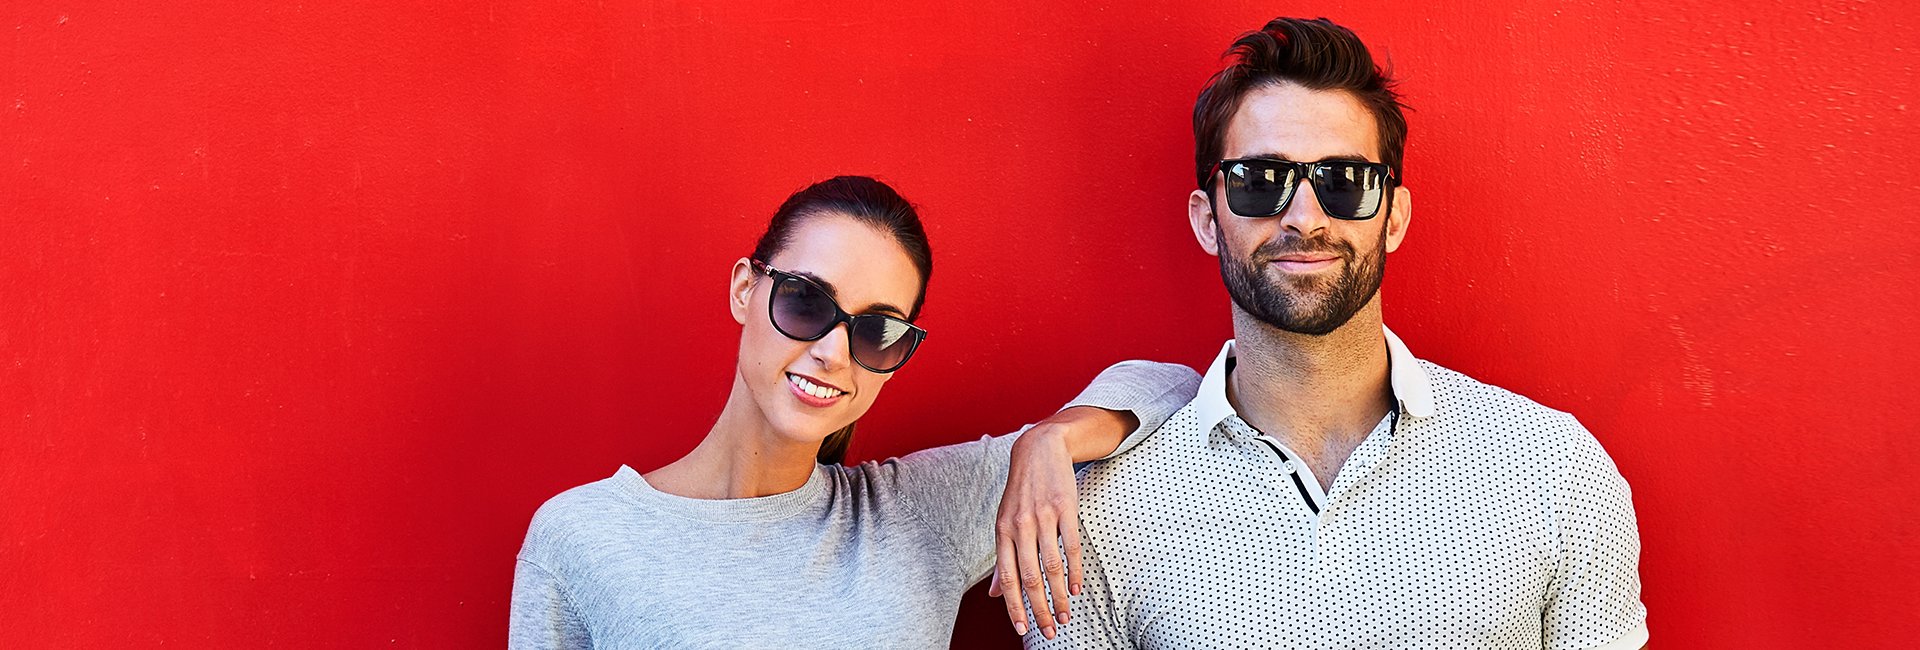 Man and woman in sunglasses smiling